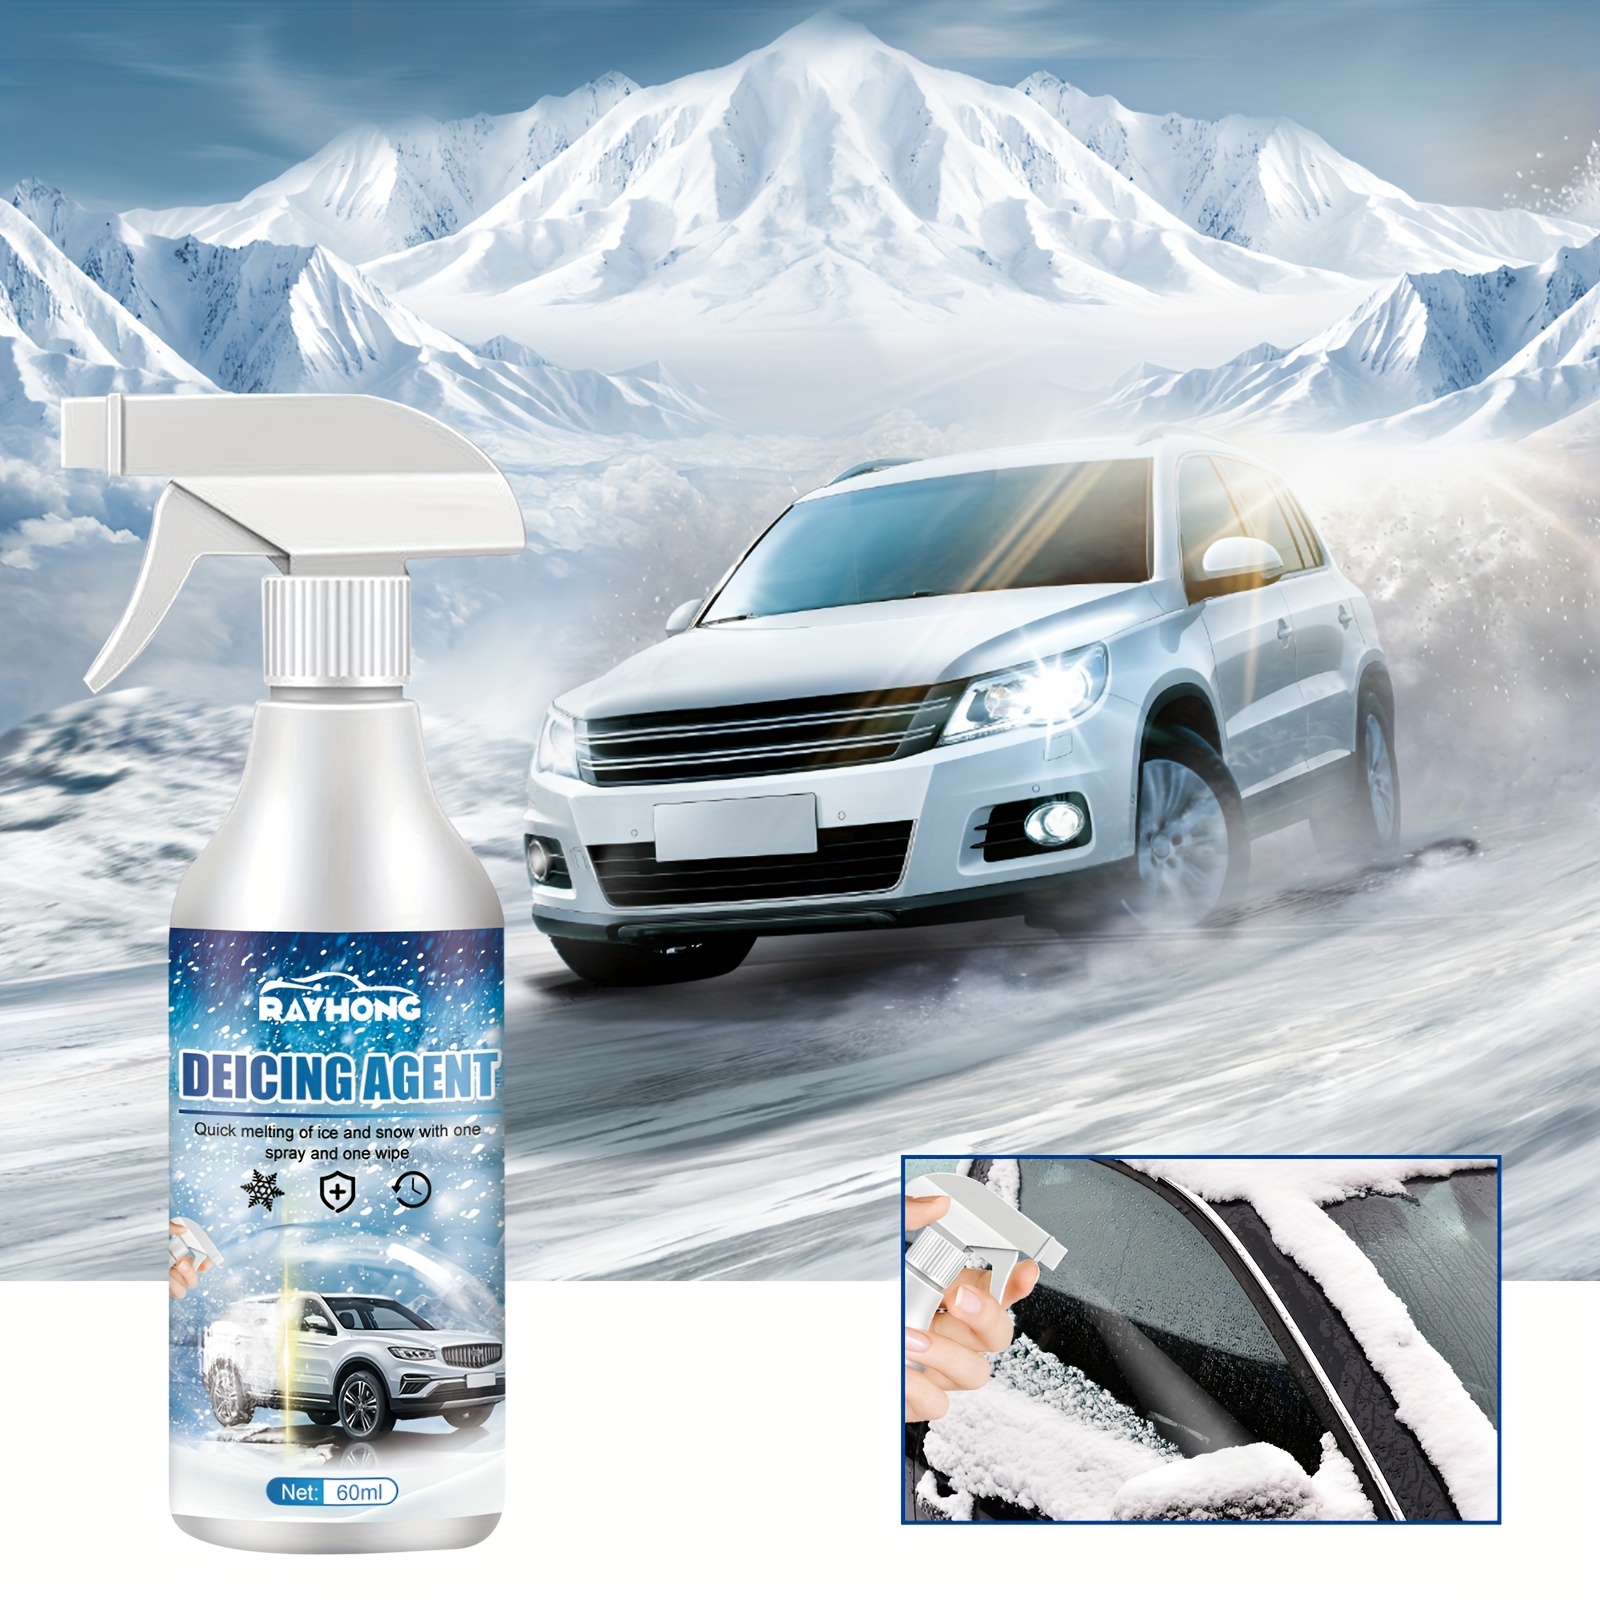 Goodway snow remover car snow melting and deicing car snow artifact glass anti-icing  car window